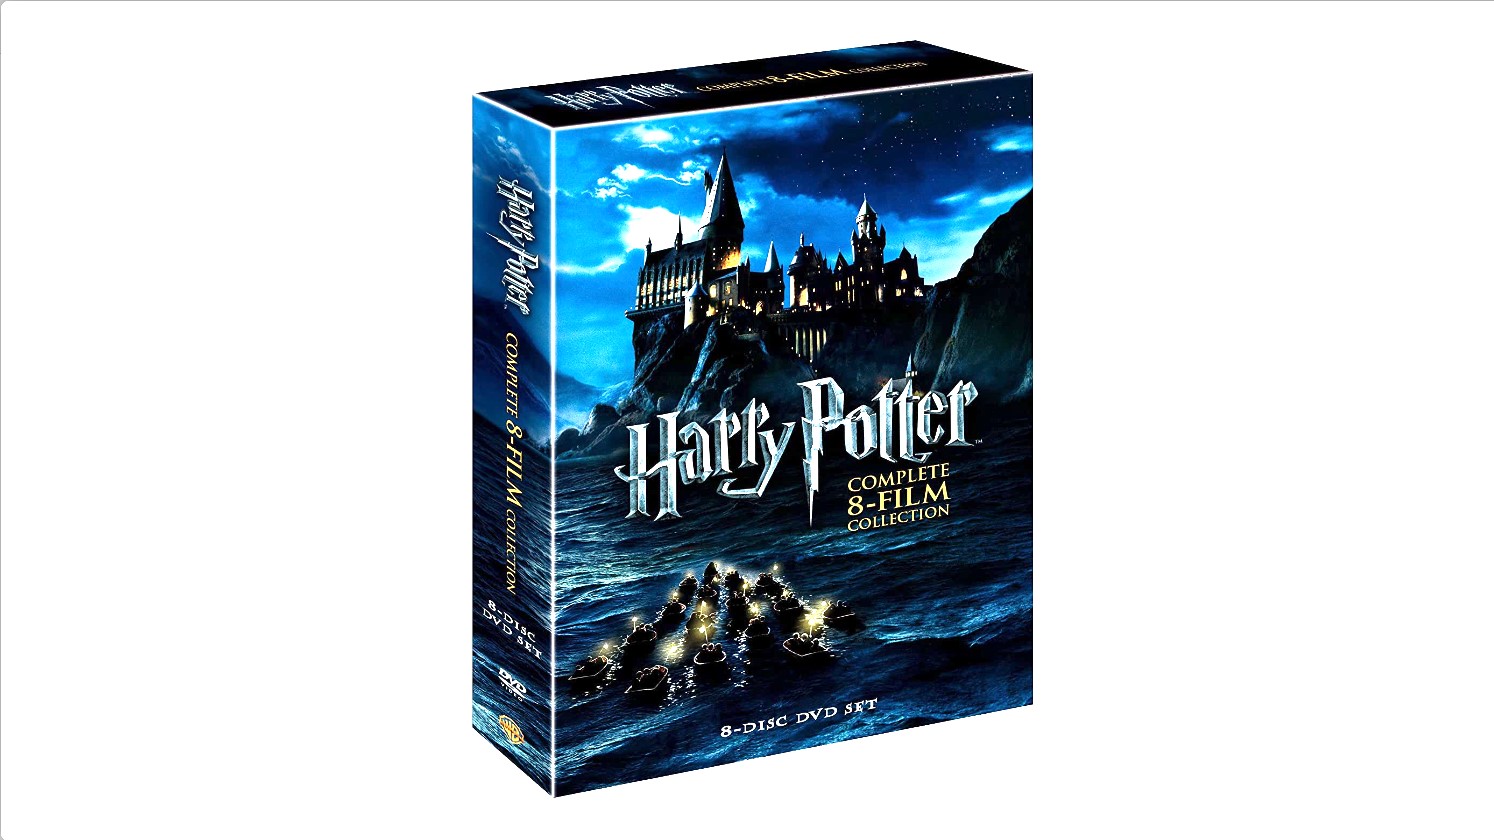 Best Harry Potter gifts to buy this year - over 20 recommendations for kids